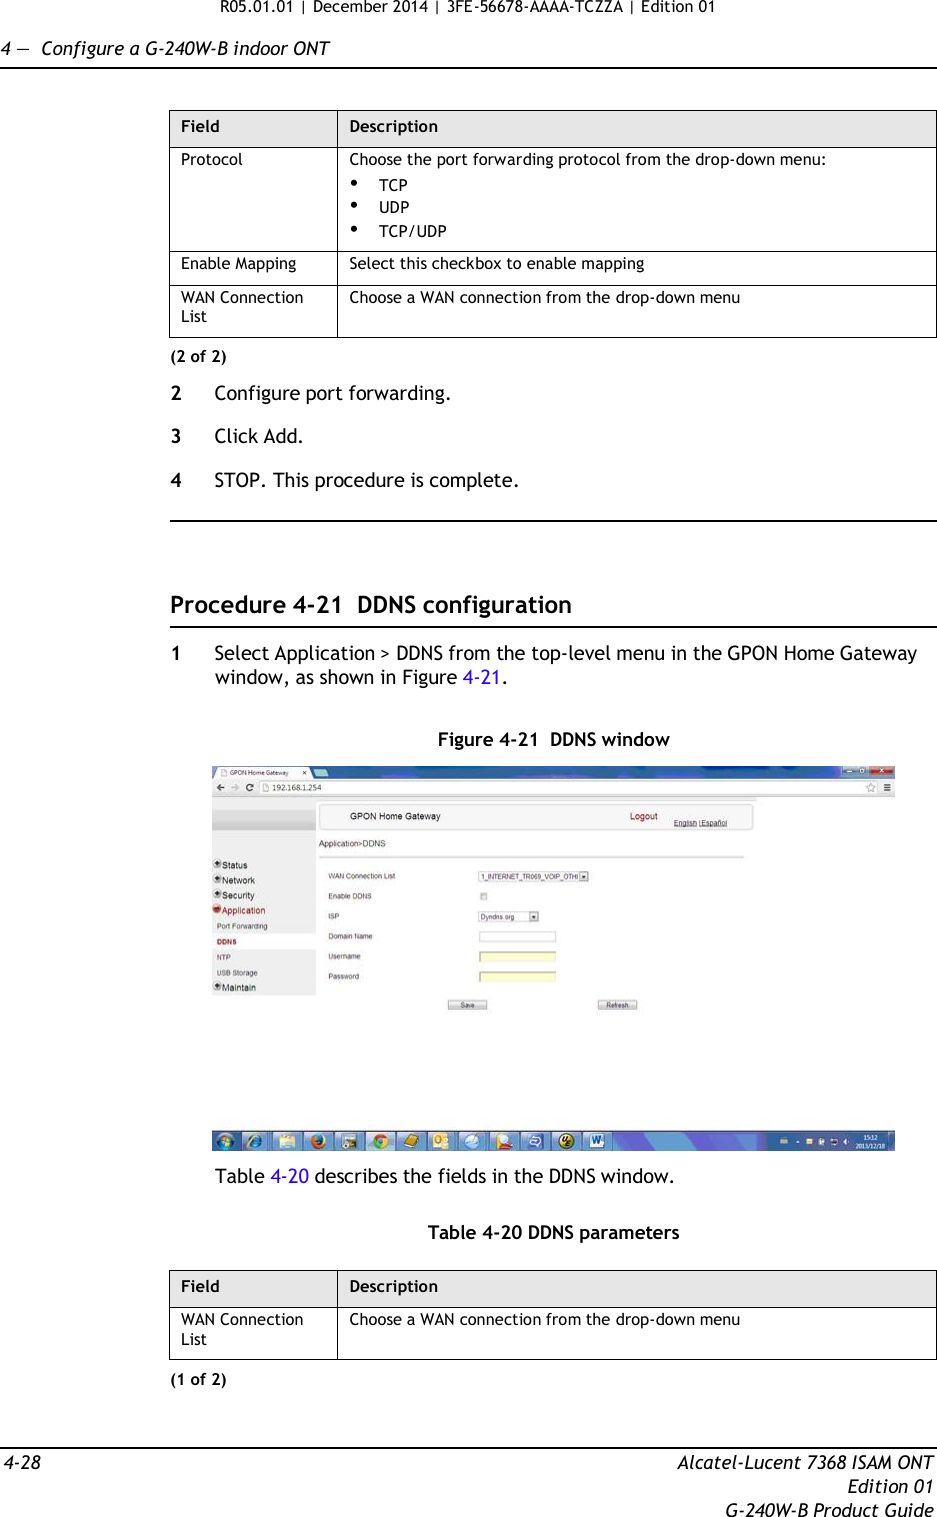 R05.01.01 | December 2014 | 3FE-56678-AAAA-TCZZA | Edition 01  4 —  Configure a G-240W-B indoor ONT   Field Description Protocol Choose the port forwarding protocol from the drop-down menu: • TCP • UDP • TCP/UDP Enable Mapping Select this checkbox to enable mapping WAN Connection List Choose a WAN connection from the drop-down menu (2 of 2)  2  Configure port forwarding.  3  Click Add.  4  STOP. This procedure is complete.      Procedure 4-21  DDNS configuration  1  Select Application &gt; DDNS from the top-level menu in the GPON Home Gateway window, as shown in Figure 4-21.   Figure 4-21  DDNS window    Table 4-20 describes the fields in the DDNS window.   Table 4-20 DDNS parameters  Field Description WAN Connection List Choose a WAN connection from the drop-down menu (1 of 2)    4-28  Alcatel-Lucent 7368 ISAM ONT Edition 01 G-240W-B Product Guide 